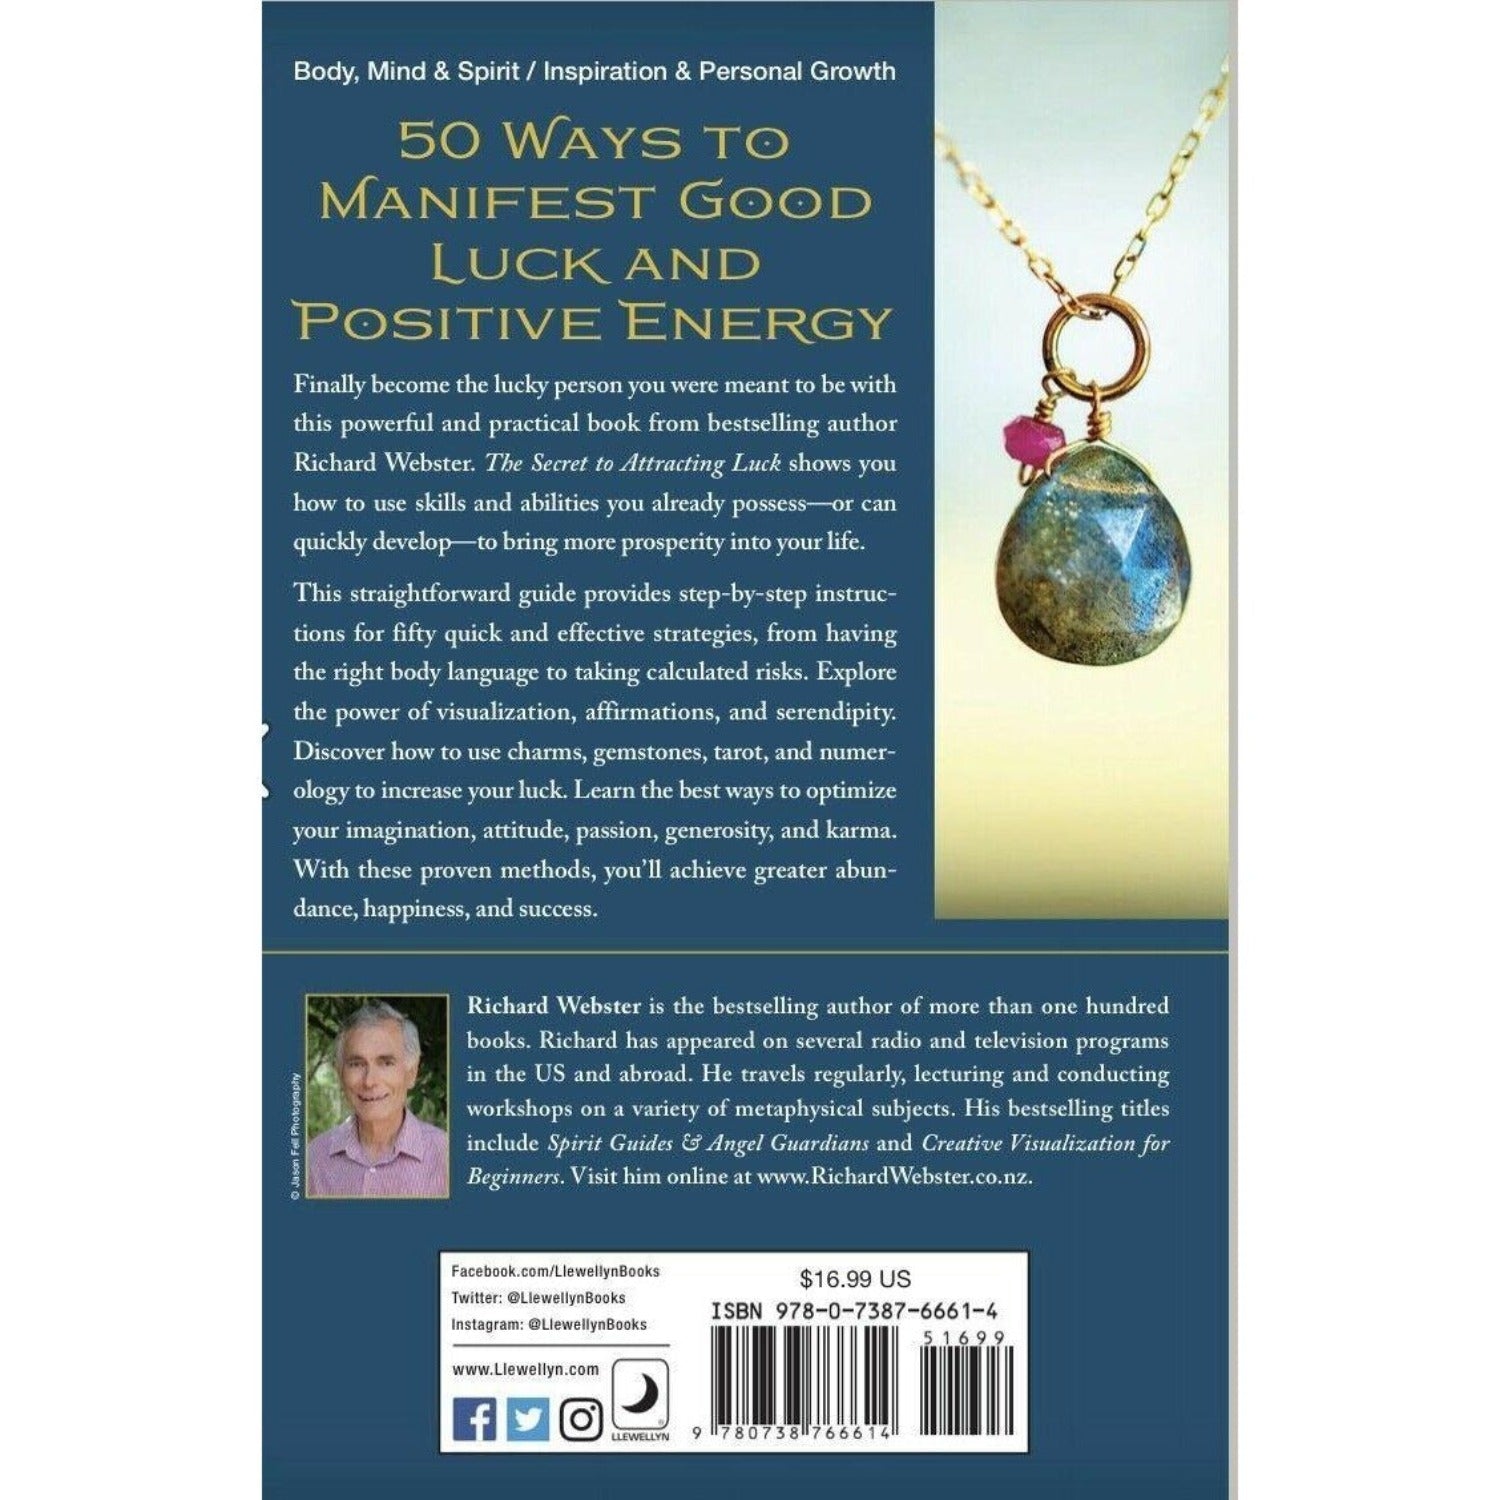 The Secret to Attracting Luck